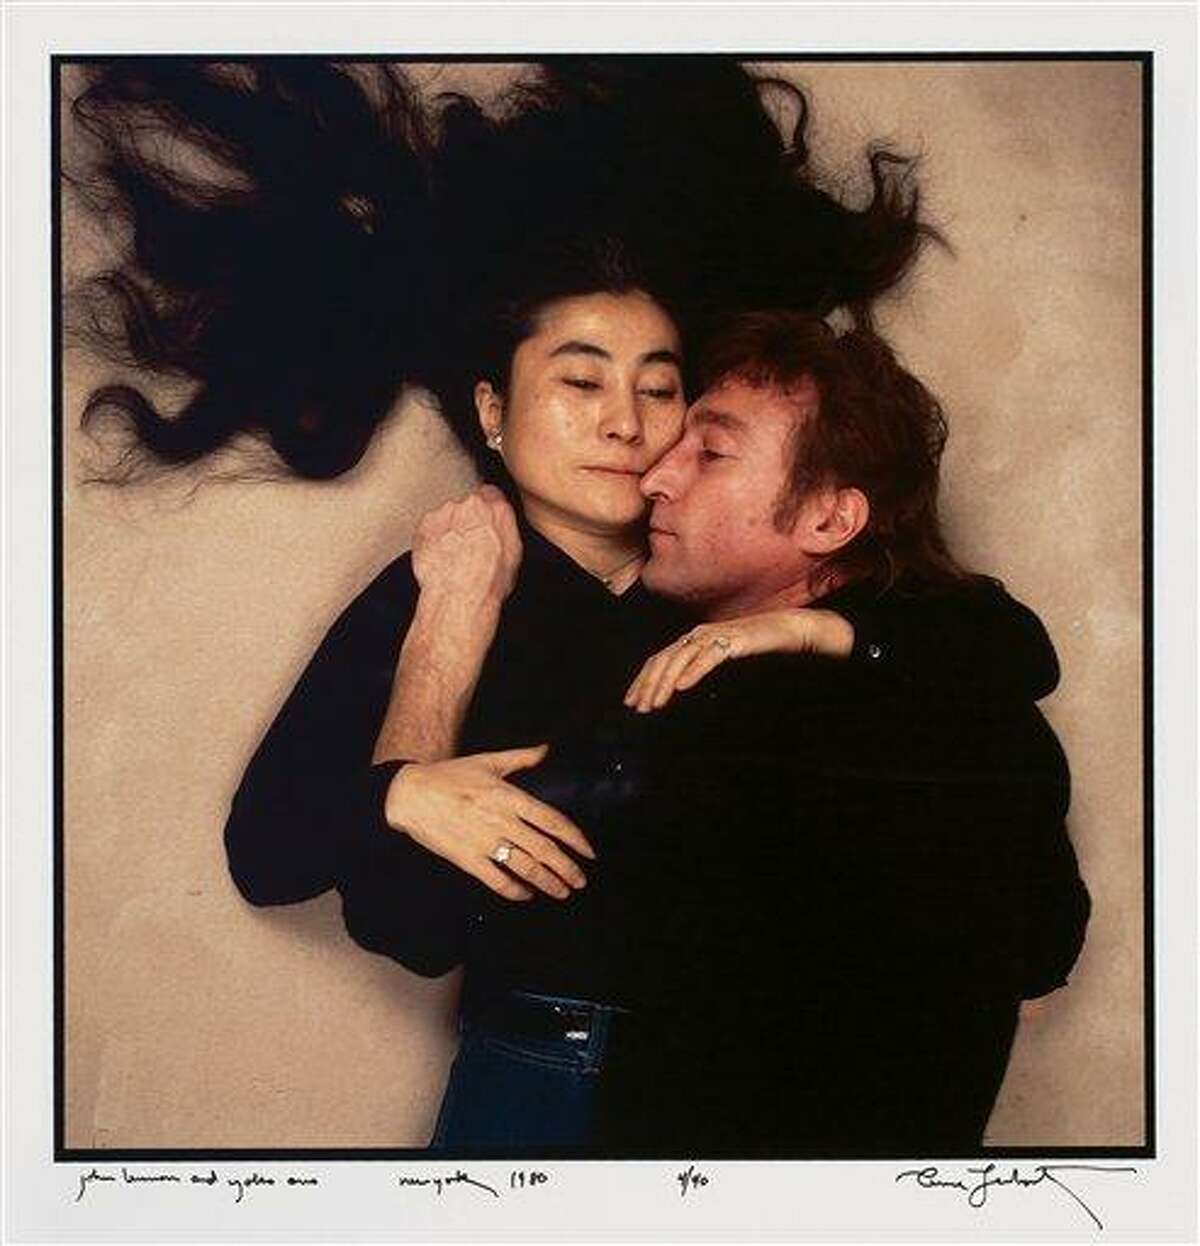 This photo provided by Swann Auction Galleries shows John Lennon and Yoko Ono in December 1980 on the last day of Lennon's life. An original copy of the photograph, taken by Annie Liebovitz for Rolling Stone magazine, will be auctioned on Oct. 19, 2010 in New York. (AP Photo/Swann Auction Galleries, Annie Liebovitz) NO SALES